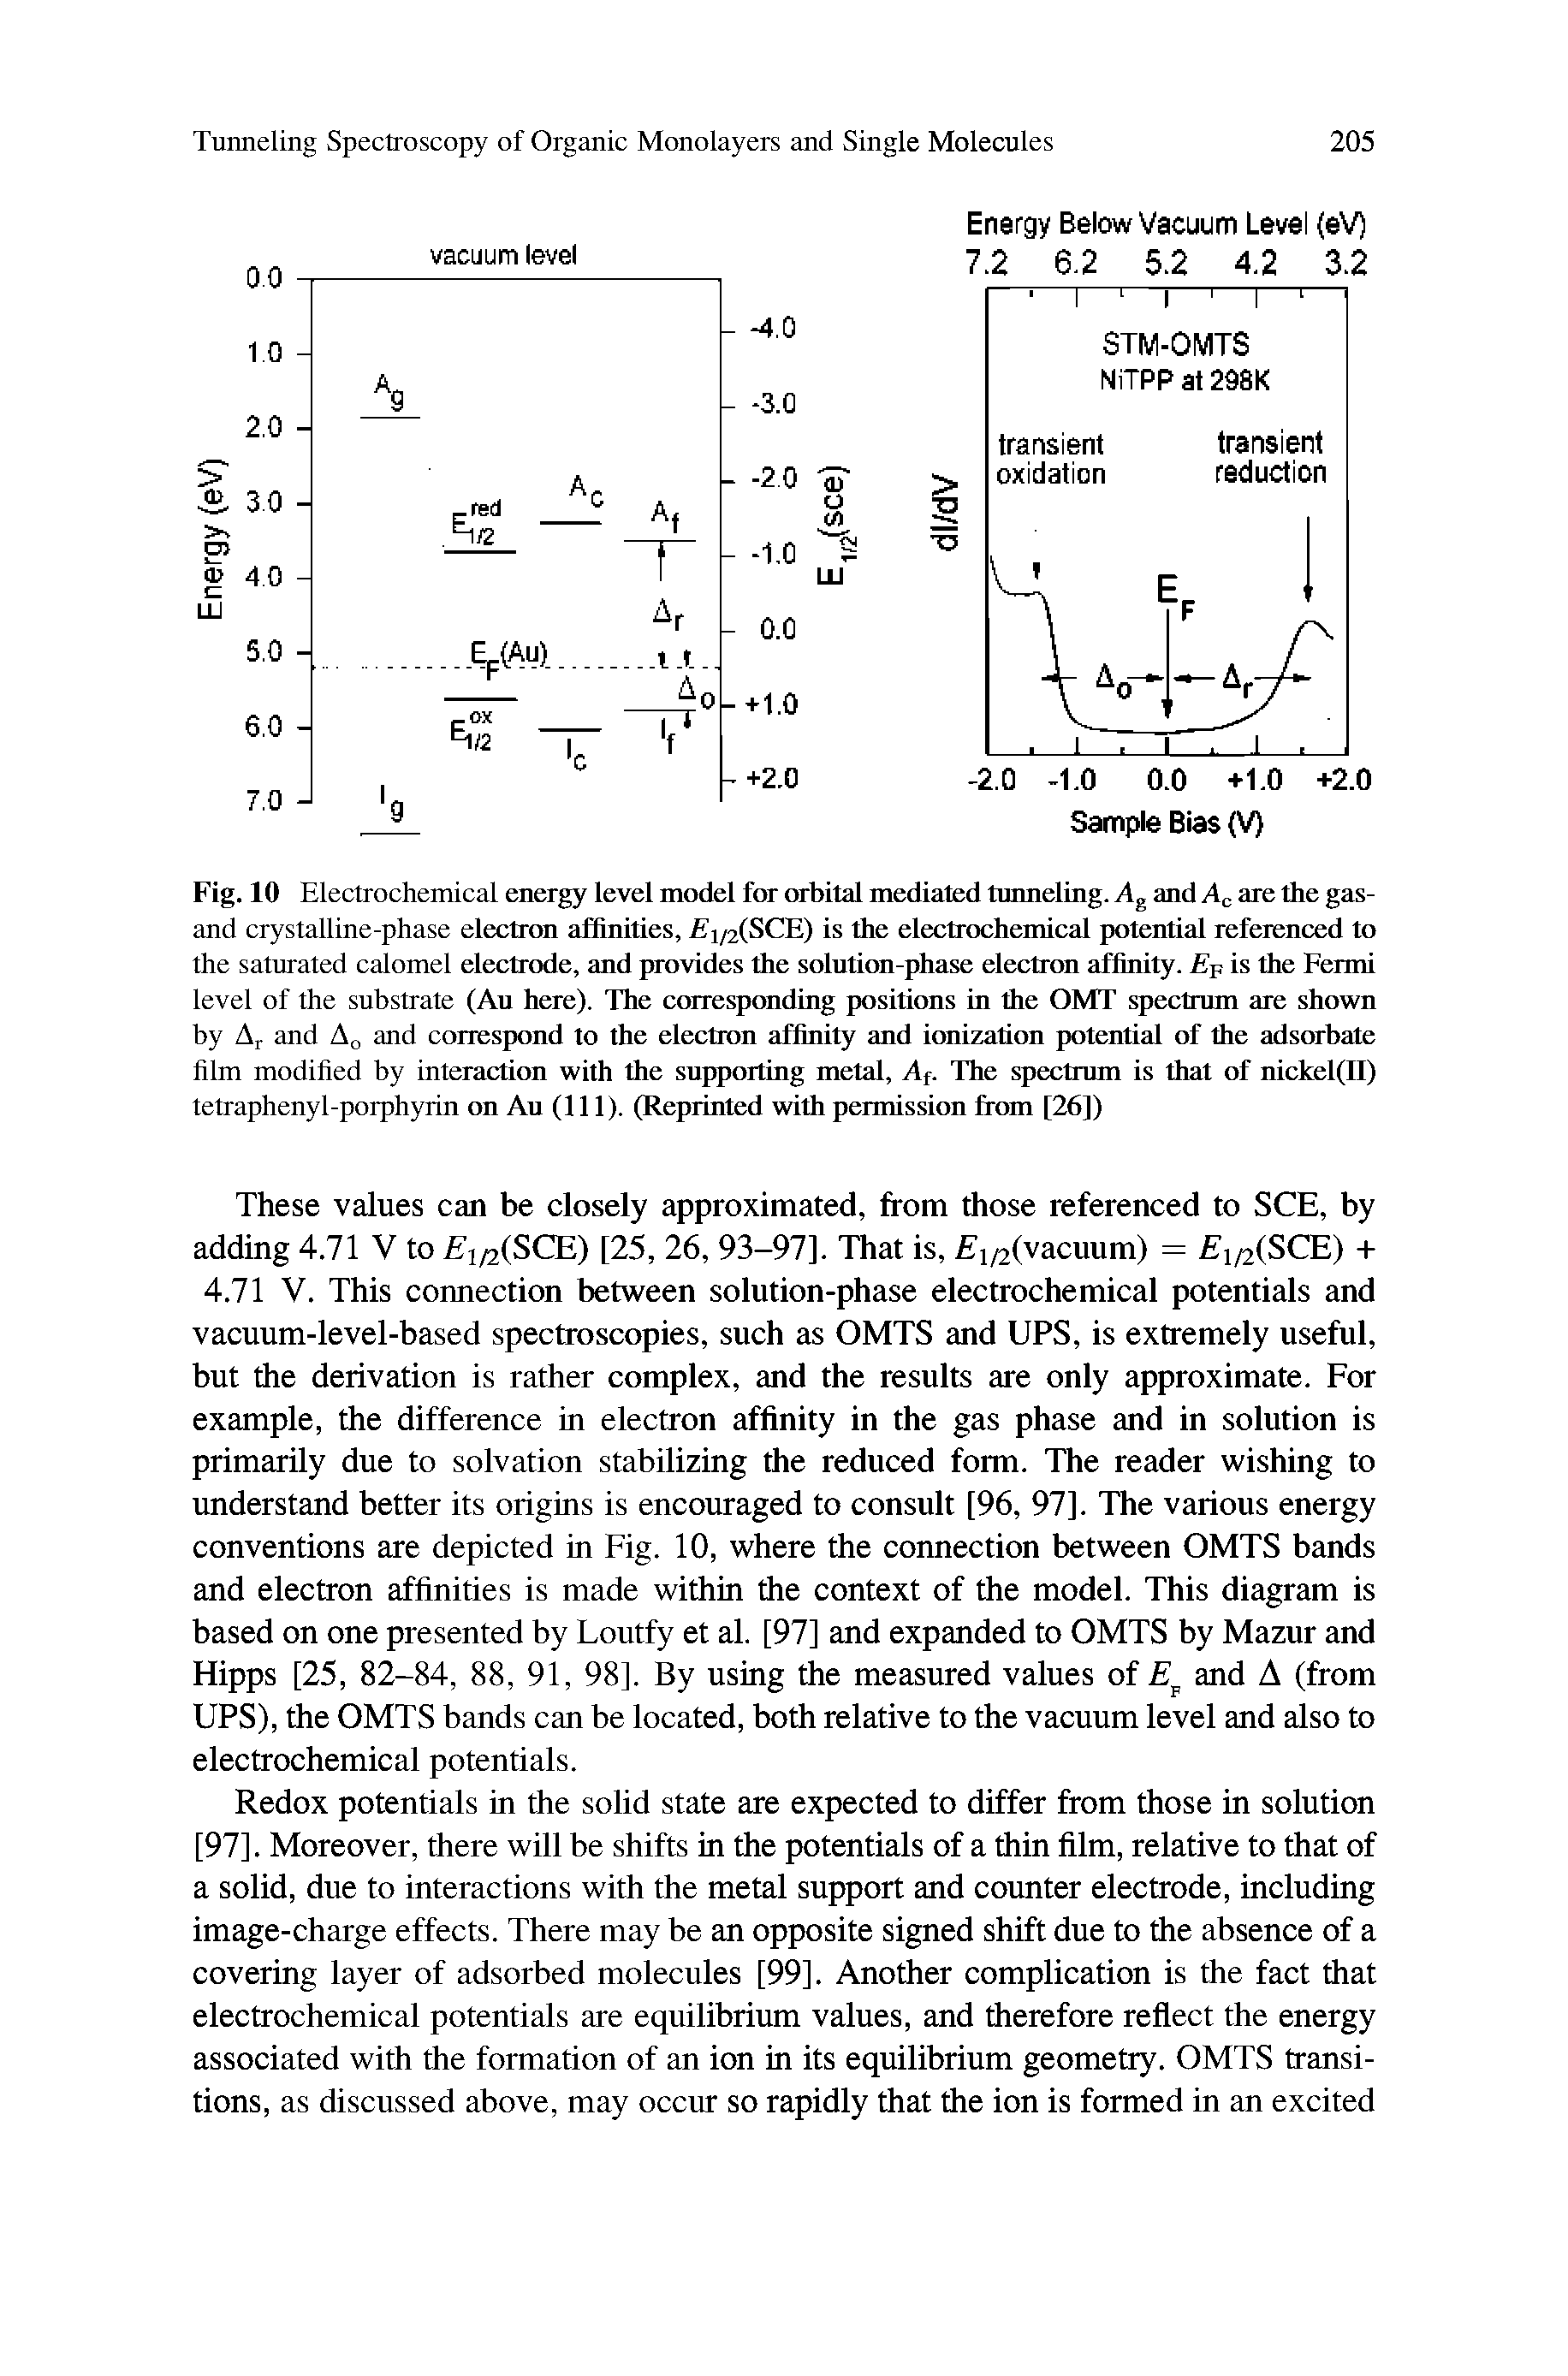 Fig. 10 Electrochemical energy level model for orbital mediated tunneling. Ap and Ac are the gas-and crystalline-phase electron affinities, 1/2(SCE) is the electrochemical potential referenced to the saturated calomel electrode, and provides the solution-phase electron affinity. Ev, is the Fermi level of the substrate (Au here). The corresponding positions in the OMT spectrum are shown by Ar and A0 and correspond to the electron affinity and ionization potential of the adsorbate film modified by interaction with the supporting metal, At. The spectrum is that of nickel(II) tetraphenyl-porphyrin on Au (111). (Reprinted with permission from [26])...